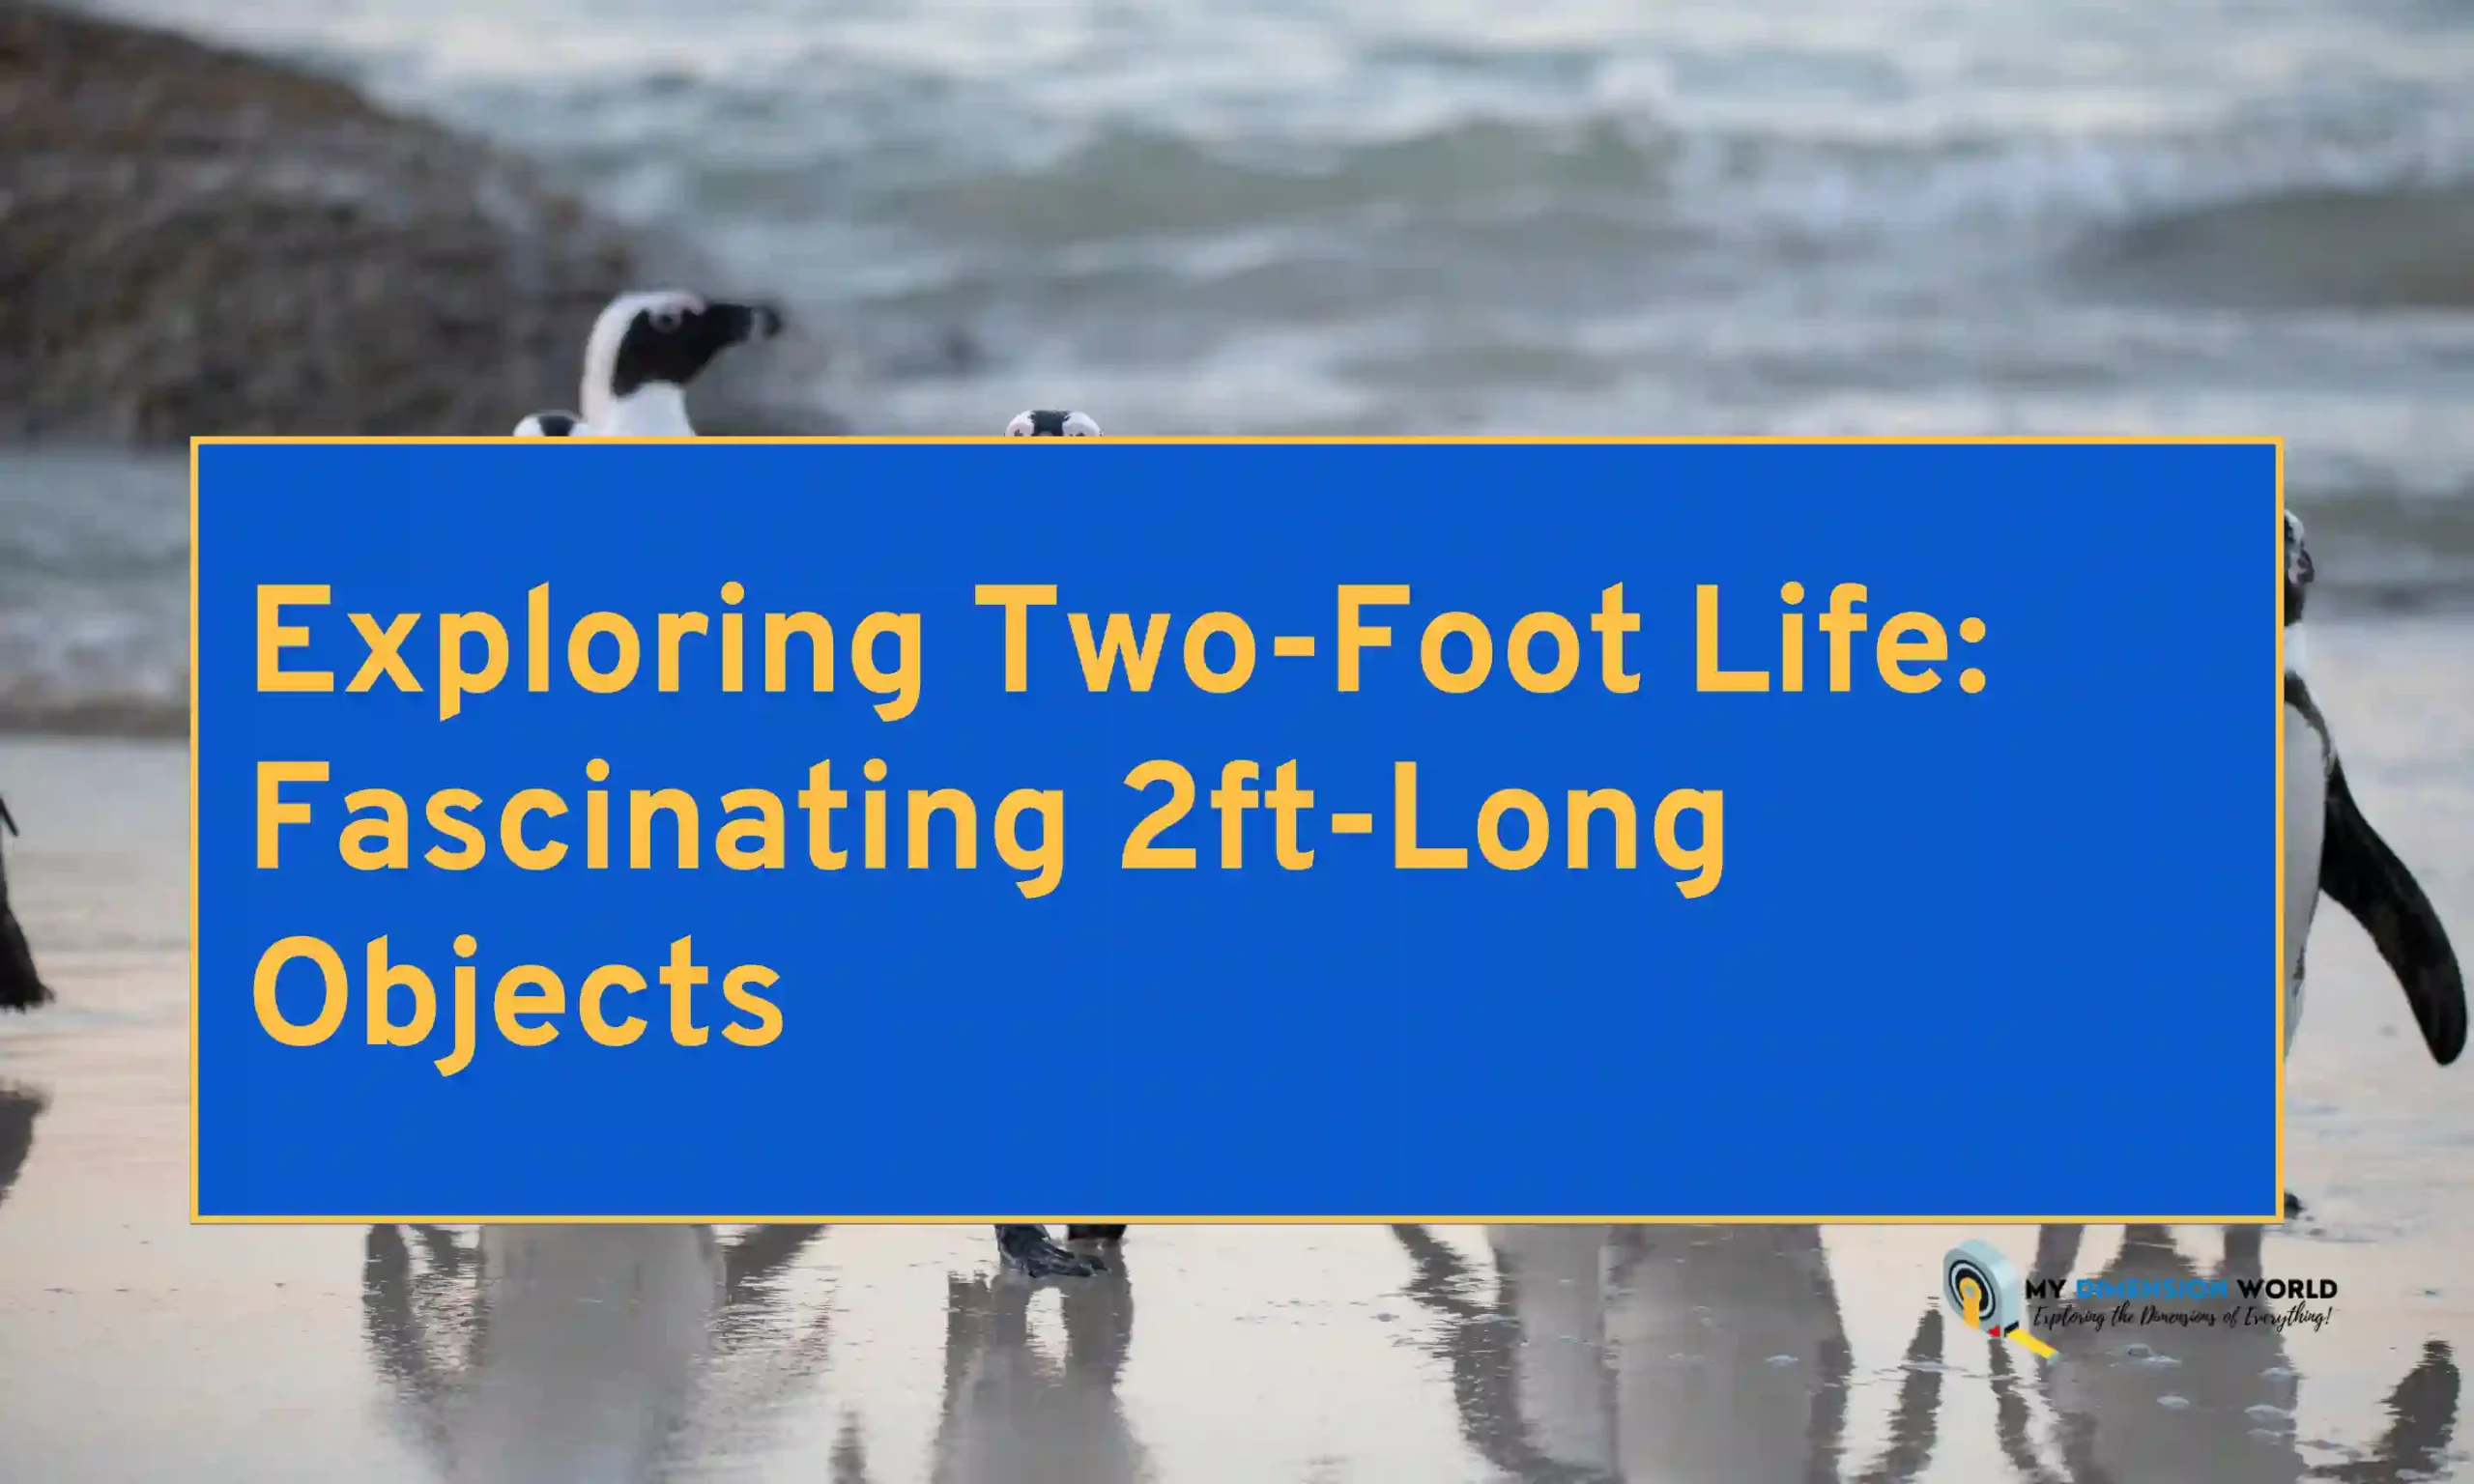 Exploring Two-Foot Life Fascinating 2ft-Long Objects